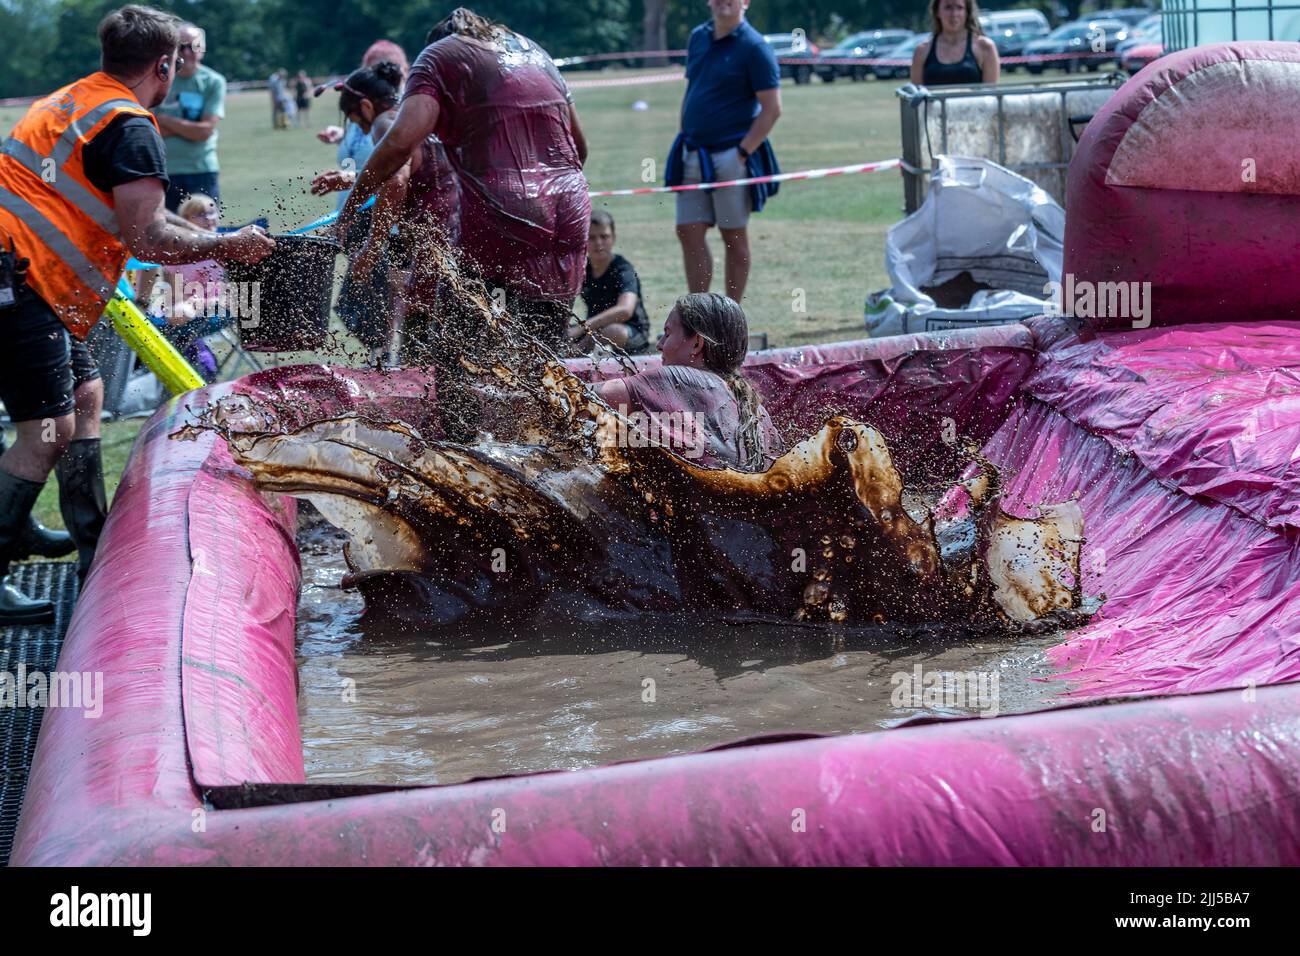 Abington Park, Northampton, UK. 23rd July 2022. Race for Life Pretty Muddy, raising funds for Cancer Research, a  obstacle route which meanders through the very scenic Abington Park. Credit: Keith J Smith./Alamy Live News. Stock Photo